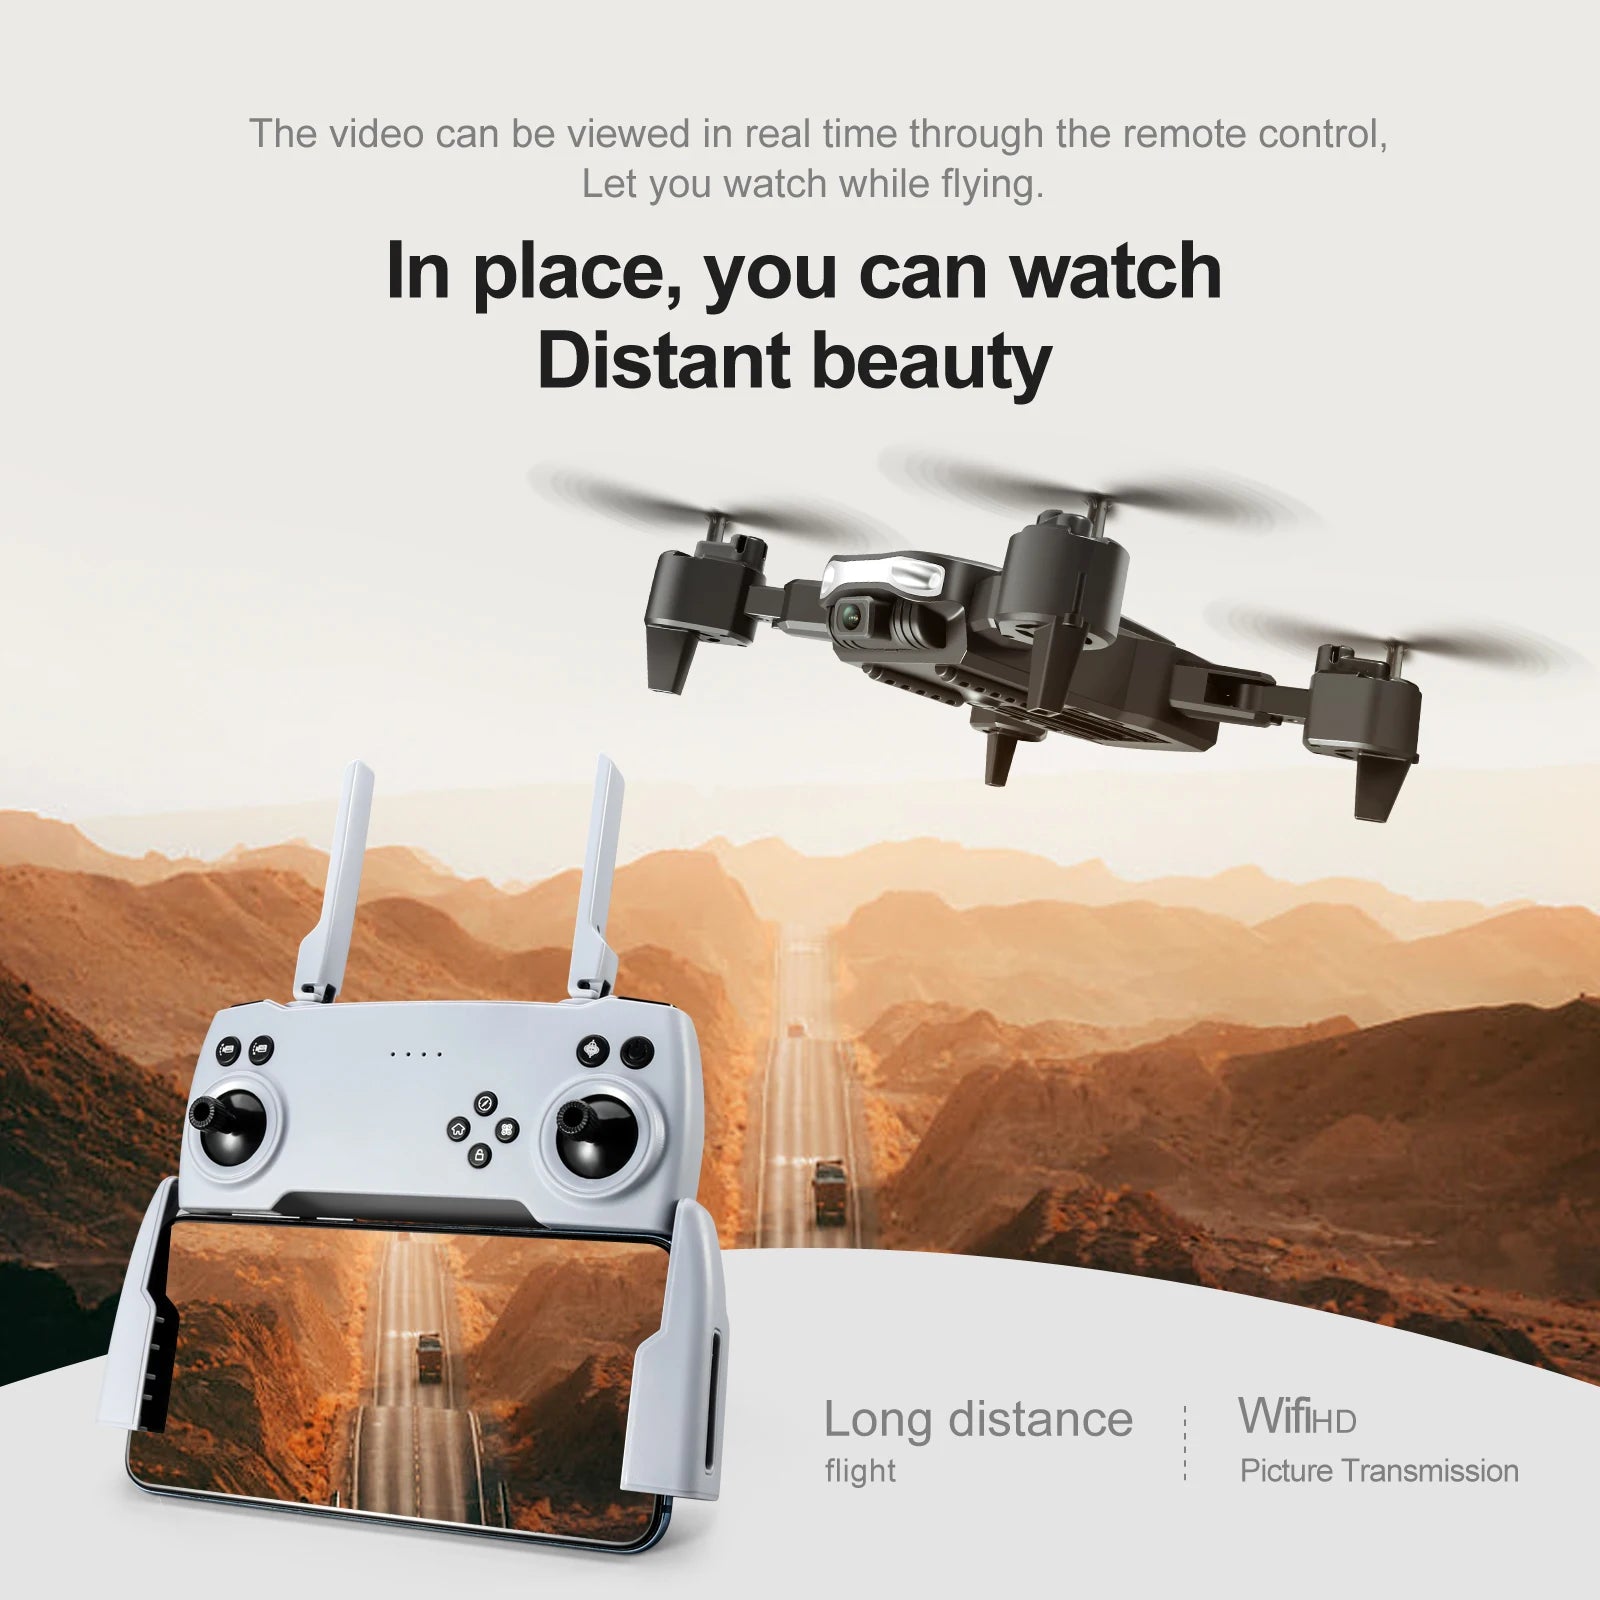 S90 Mini Drone, video can be viewed in real time through the remote control .